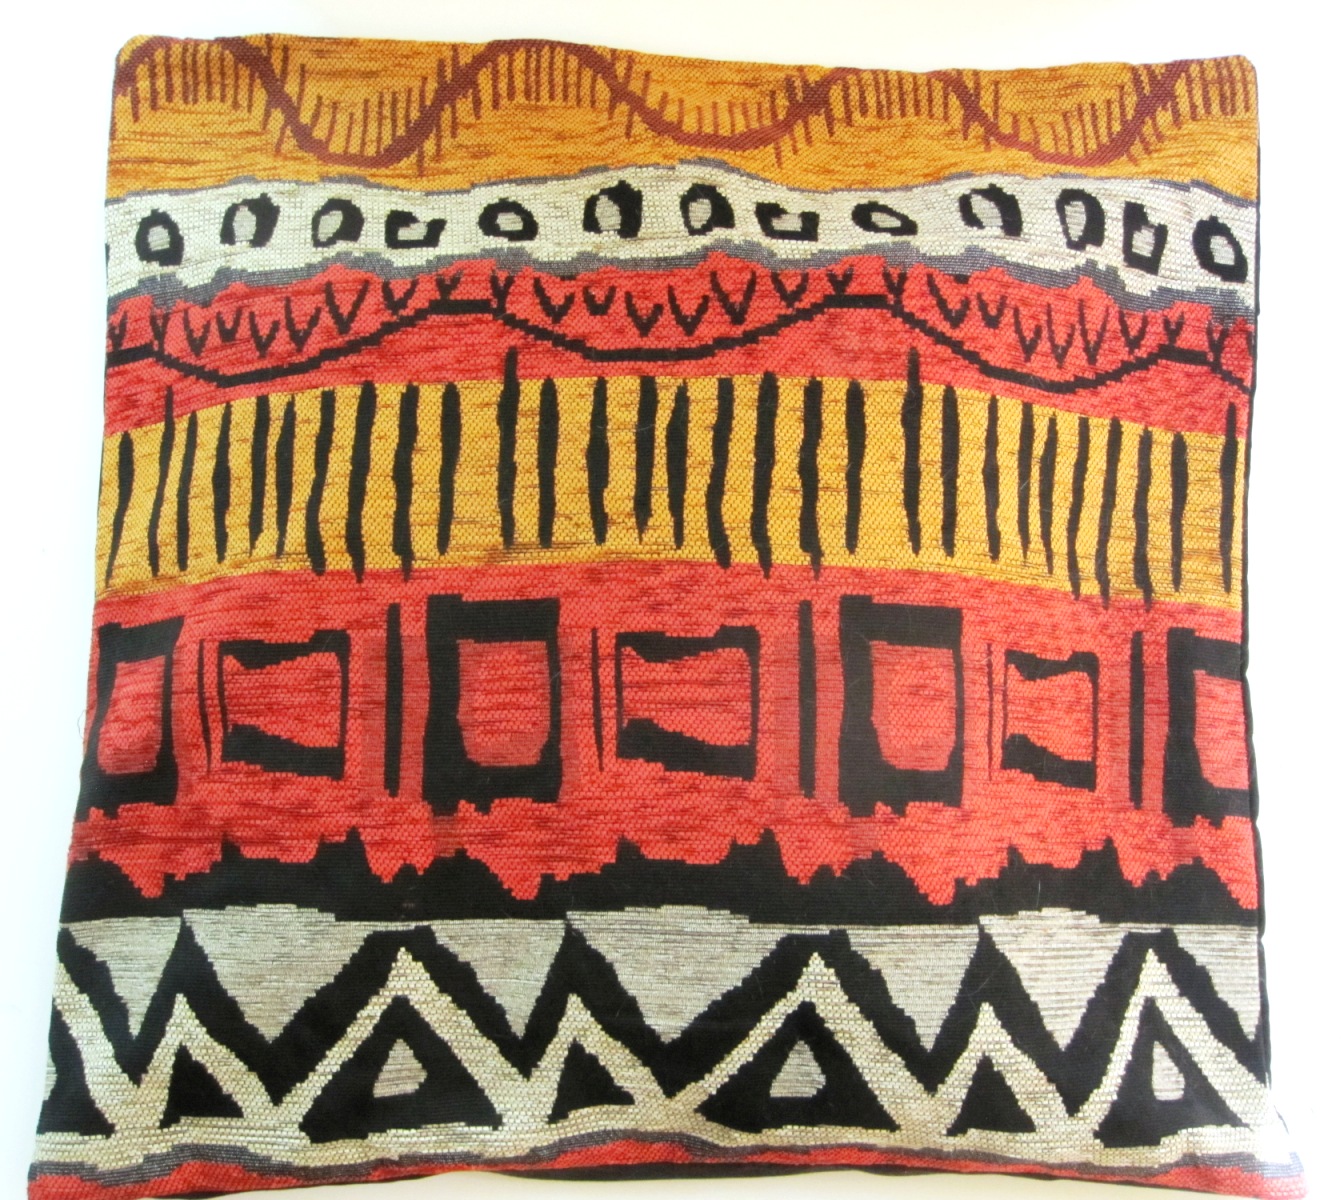 South African Woven textiles